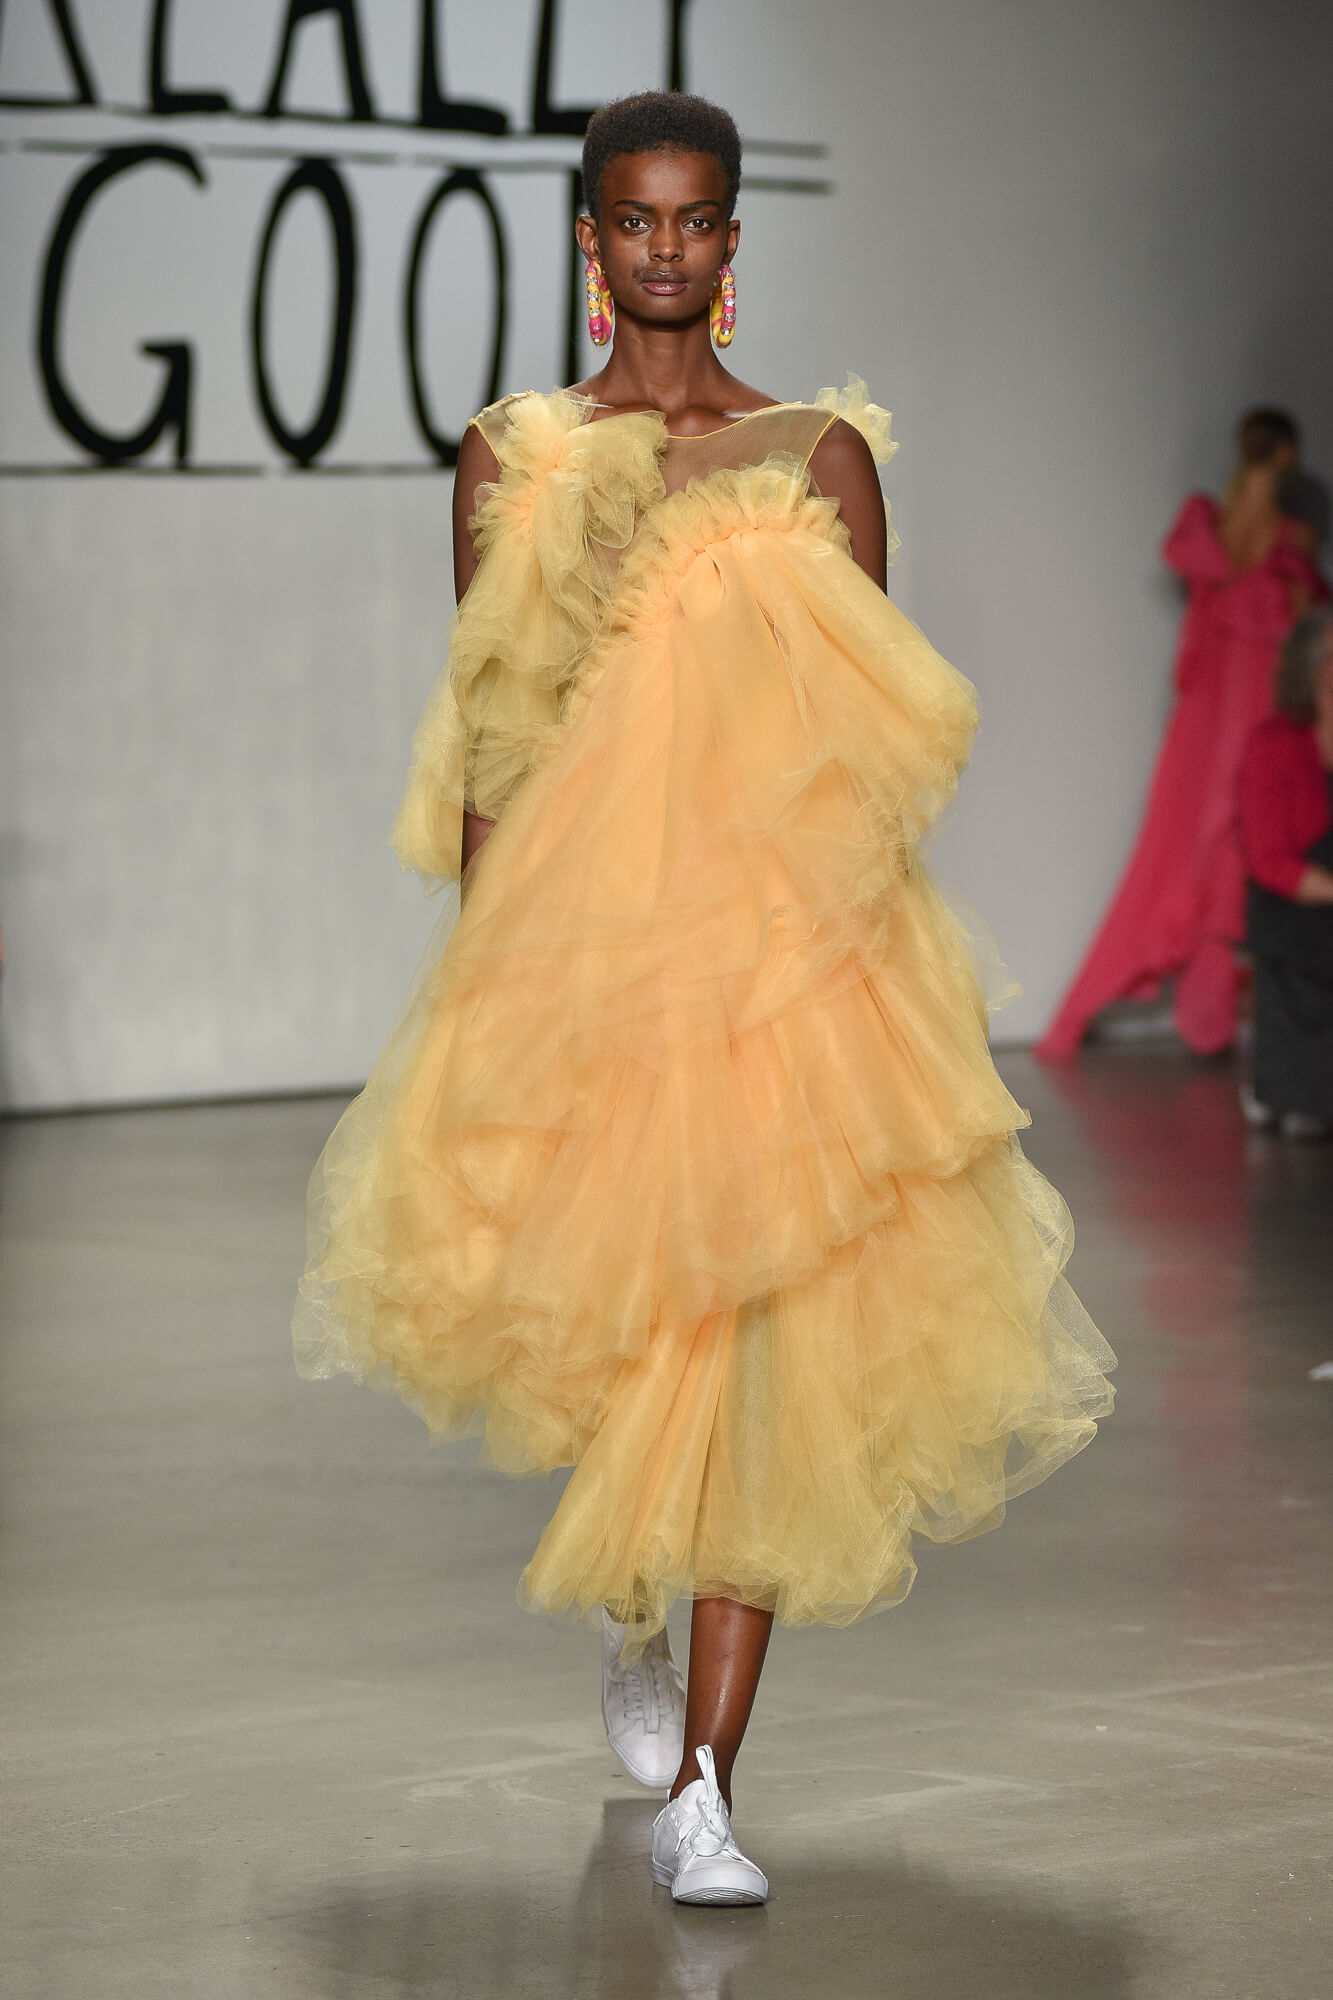 A model walks down a runway wearing a yellow dress with multiple layers of translucent fabric.